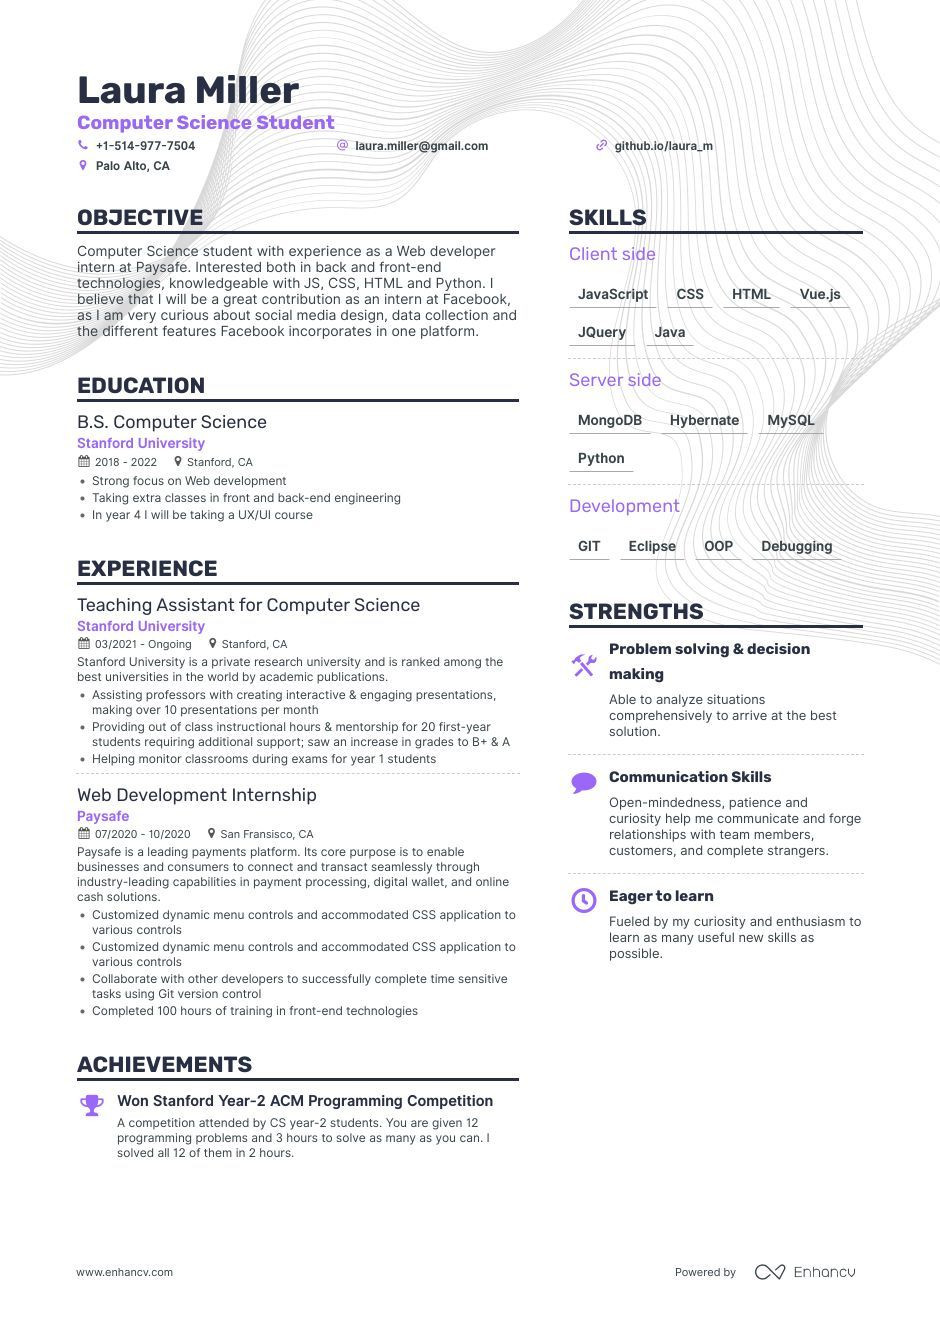 Sample Resume area Of Strength Information Technology Computer Science Resume Examples & Guide for 2022 (layout, Skills …